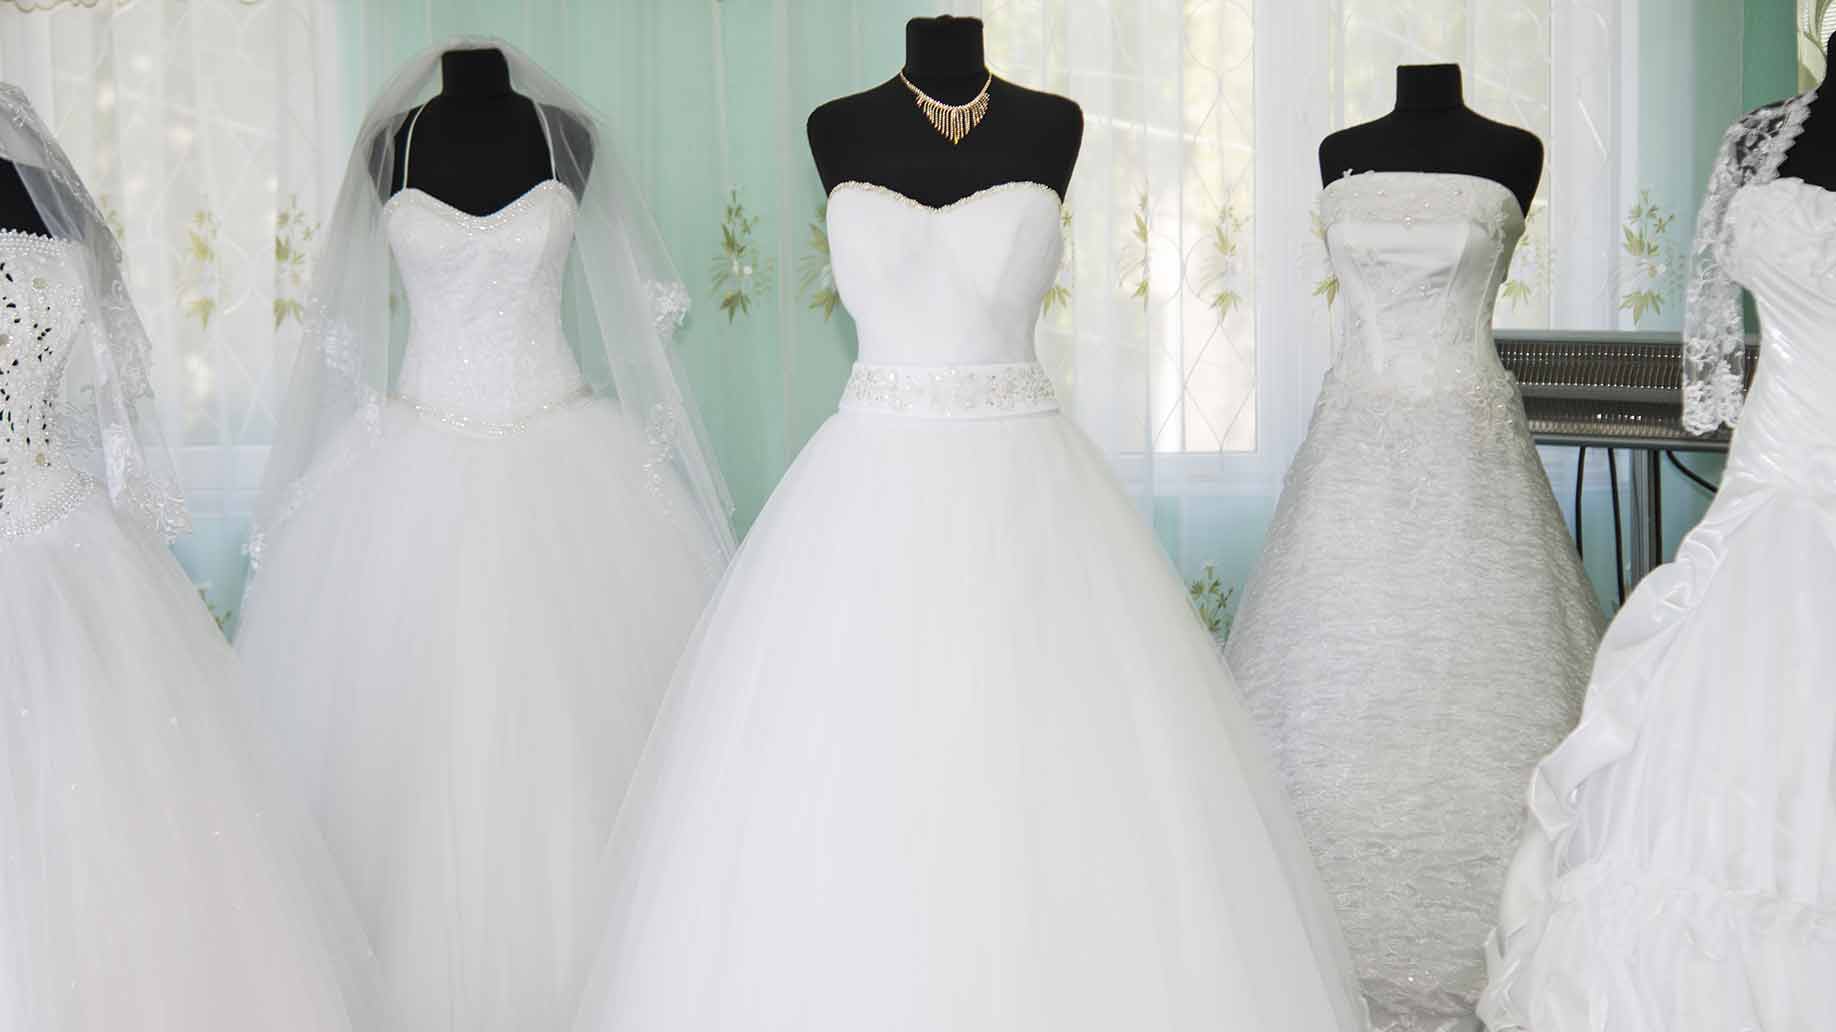 How Much Does a Wedding Dress Cost - Prices